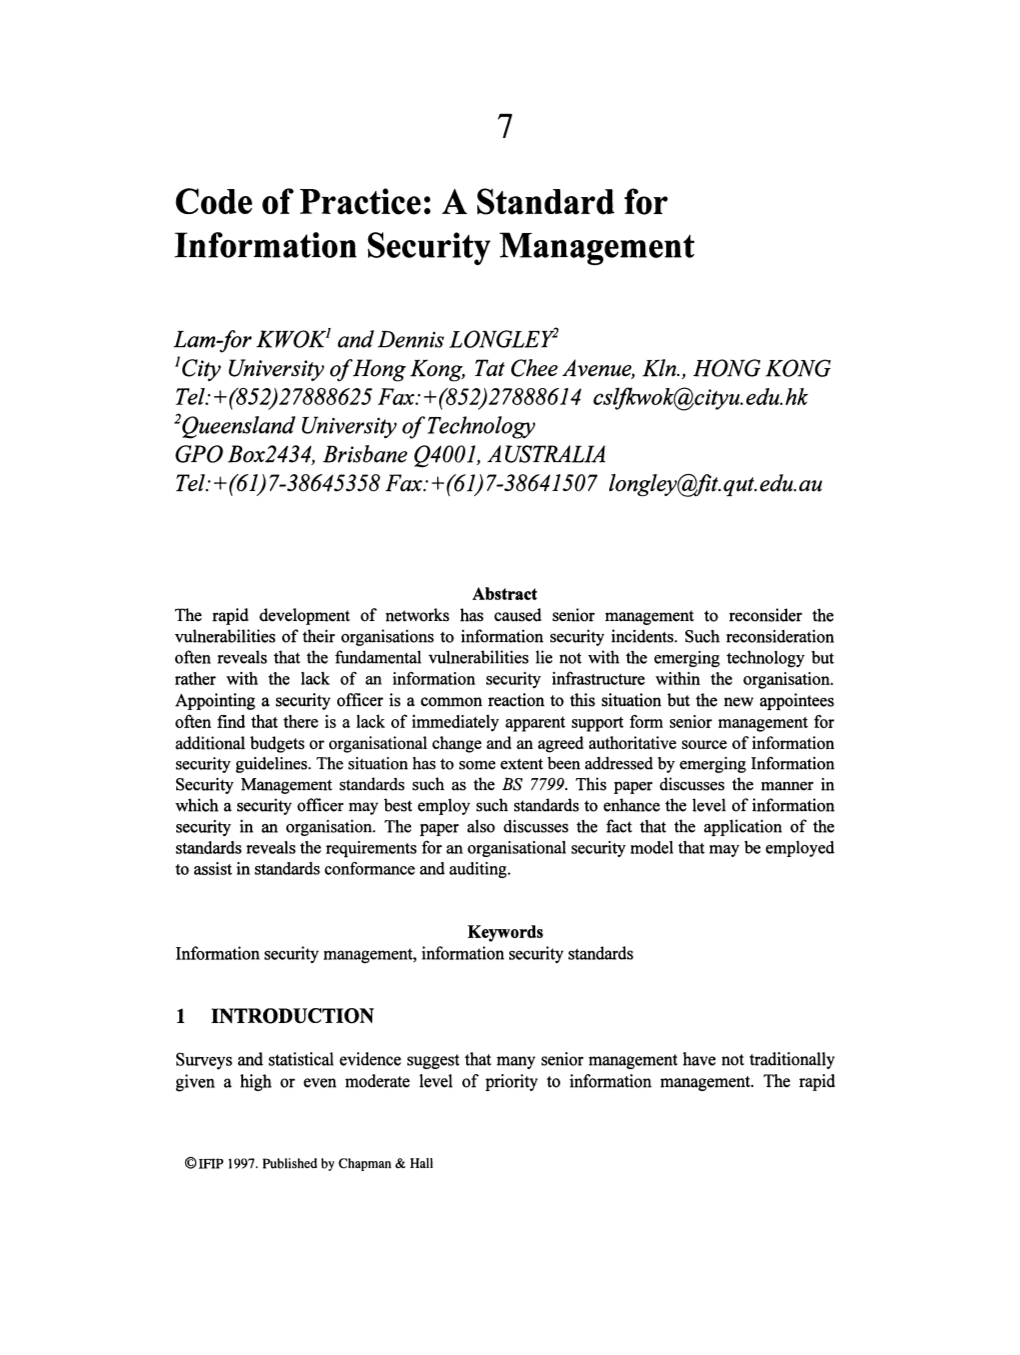 7 Code of Practice: a Standard for Information Security Management